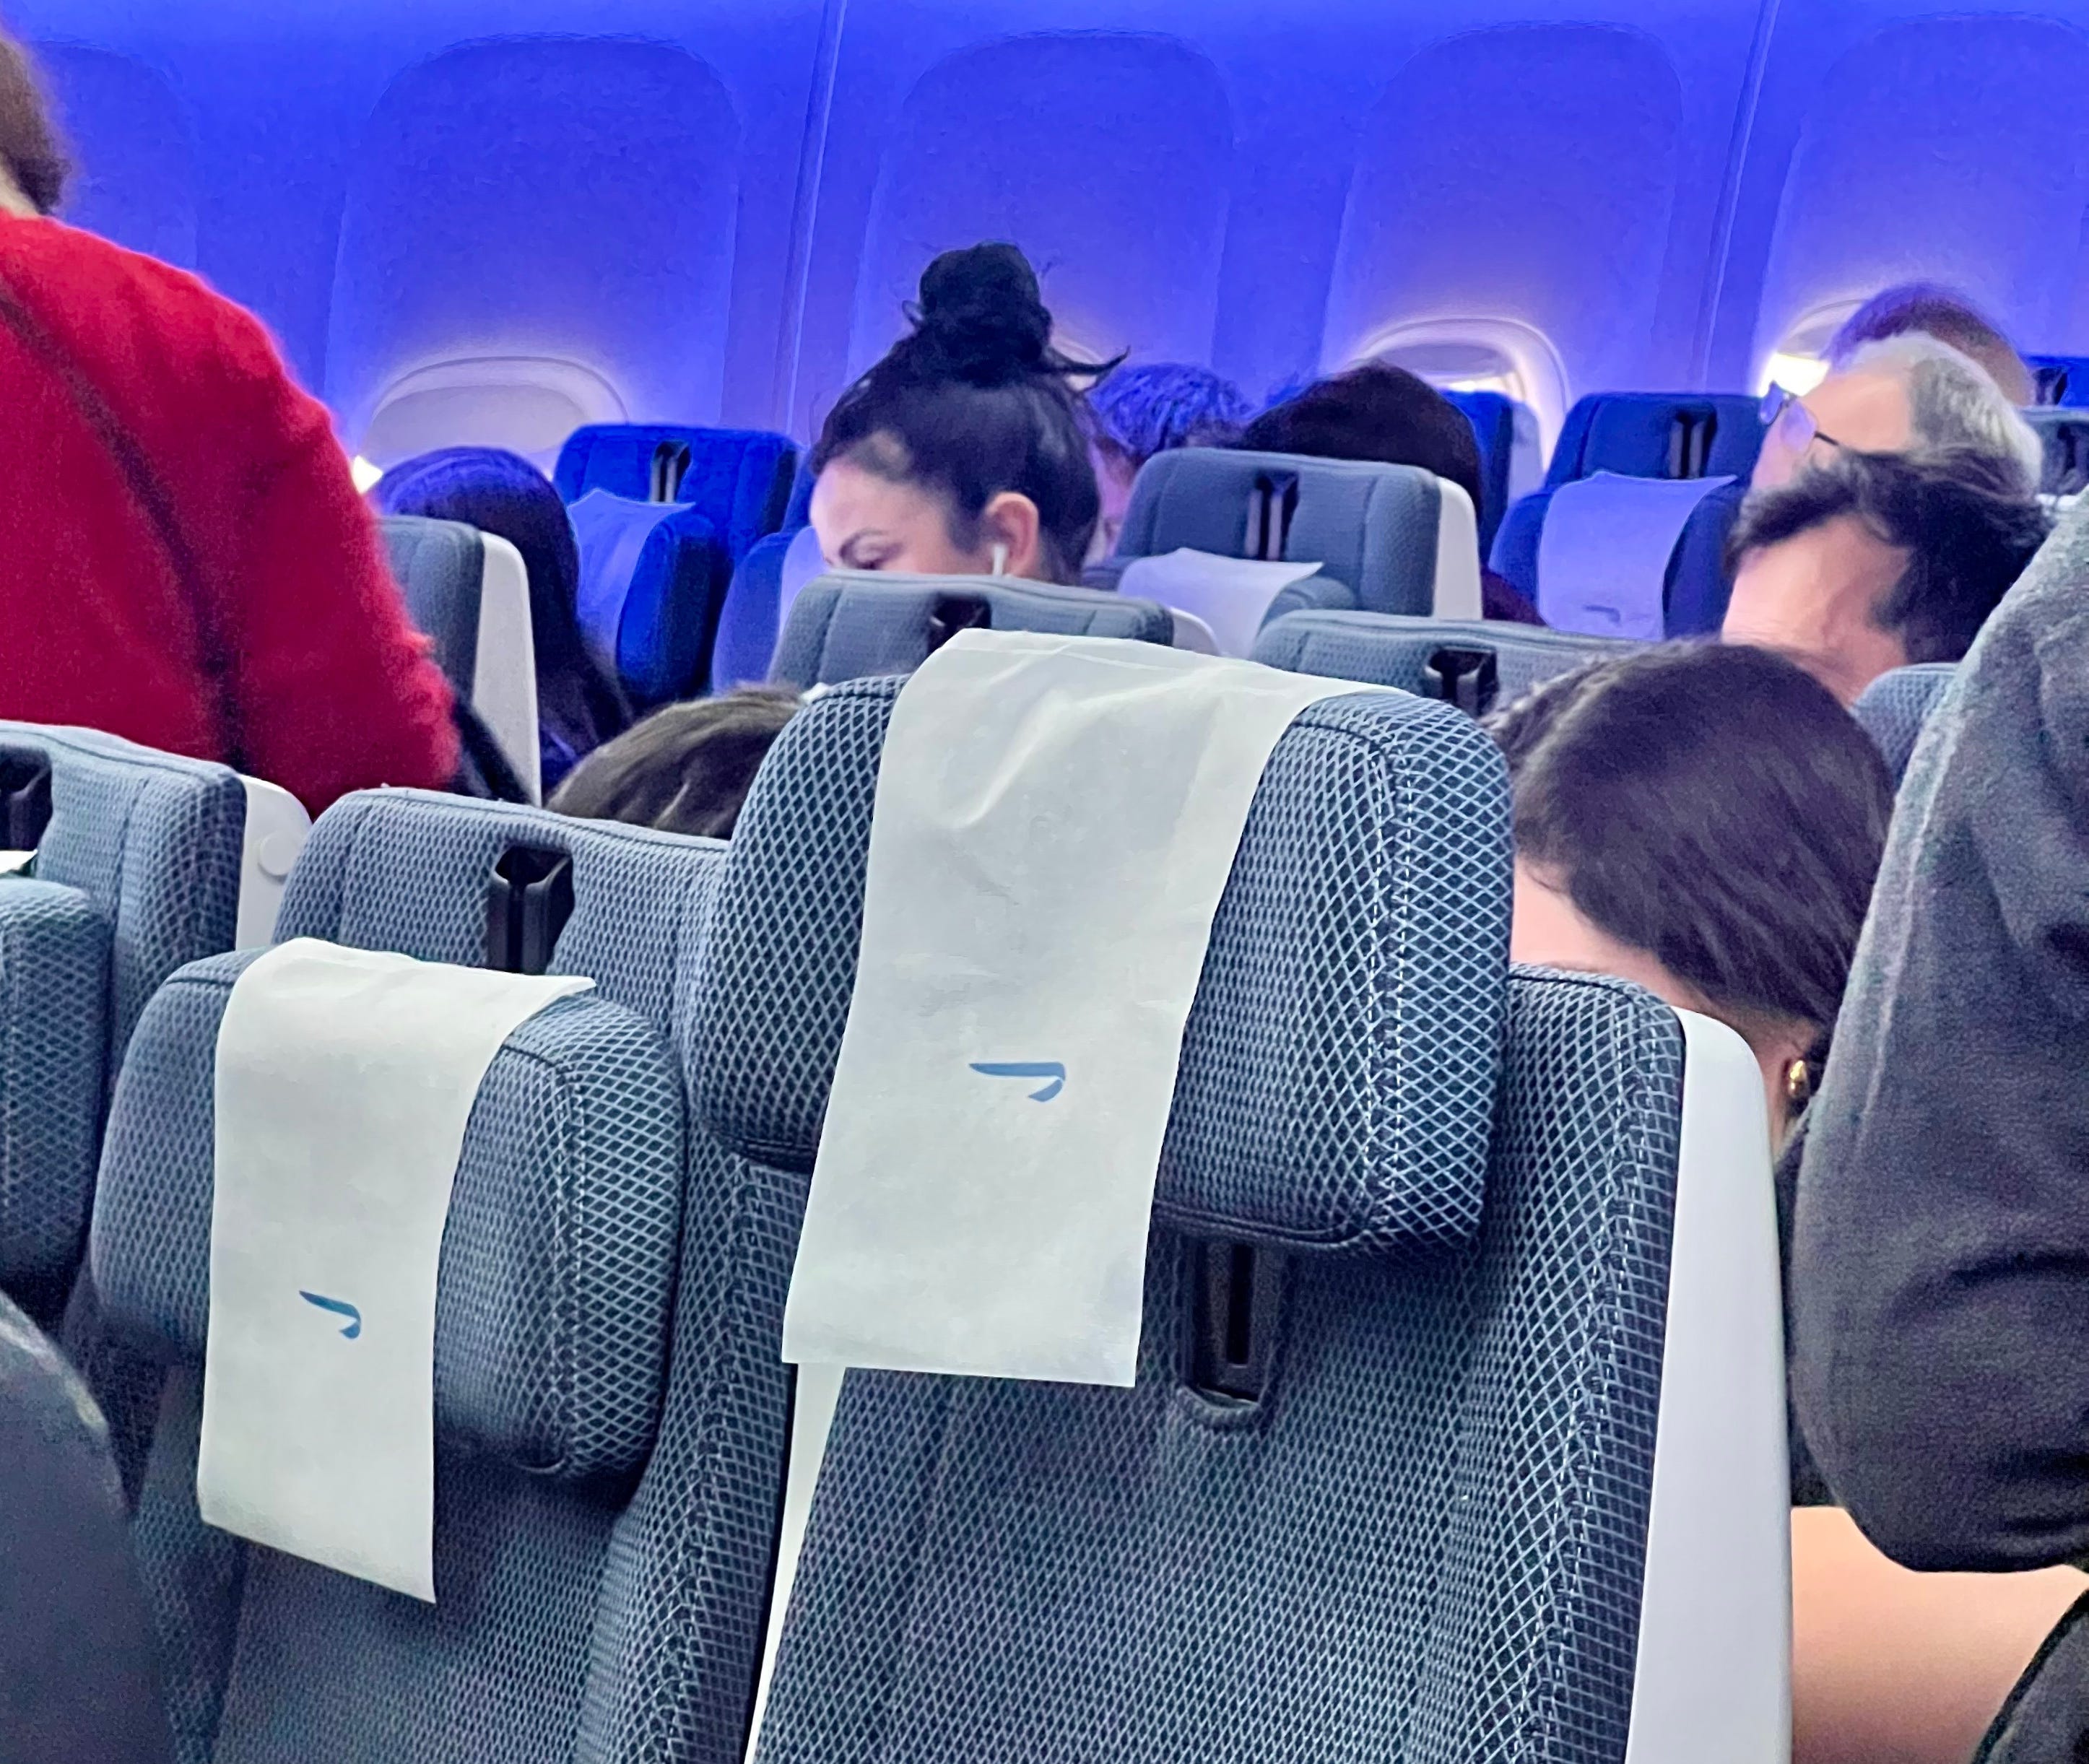 <p>The headrest adjusted up and down, and the wings folded in nicely. If this was a red-eye flight and I planned to sleep, the headrest would have been essential in helping me rest.</p><p>Anytime I fly on an airline without a headrest — or <a href="https://www.businessinsider.com/air-india-economy-cabin-i-flew-miserable-bad-seats-review-2024-2">I get a broken one</a> — I find it really difficult to fall asleep.</p>